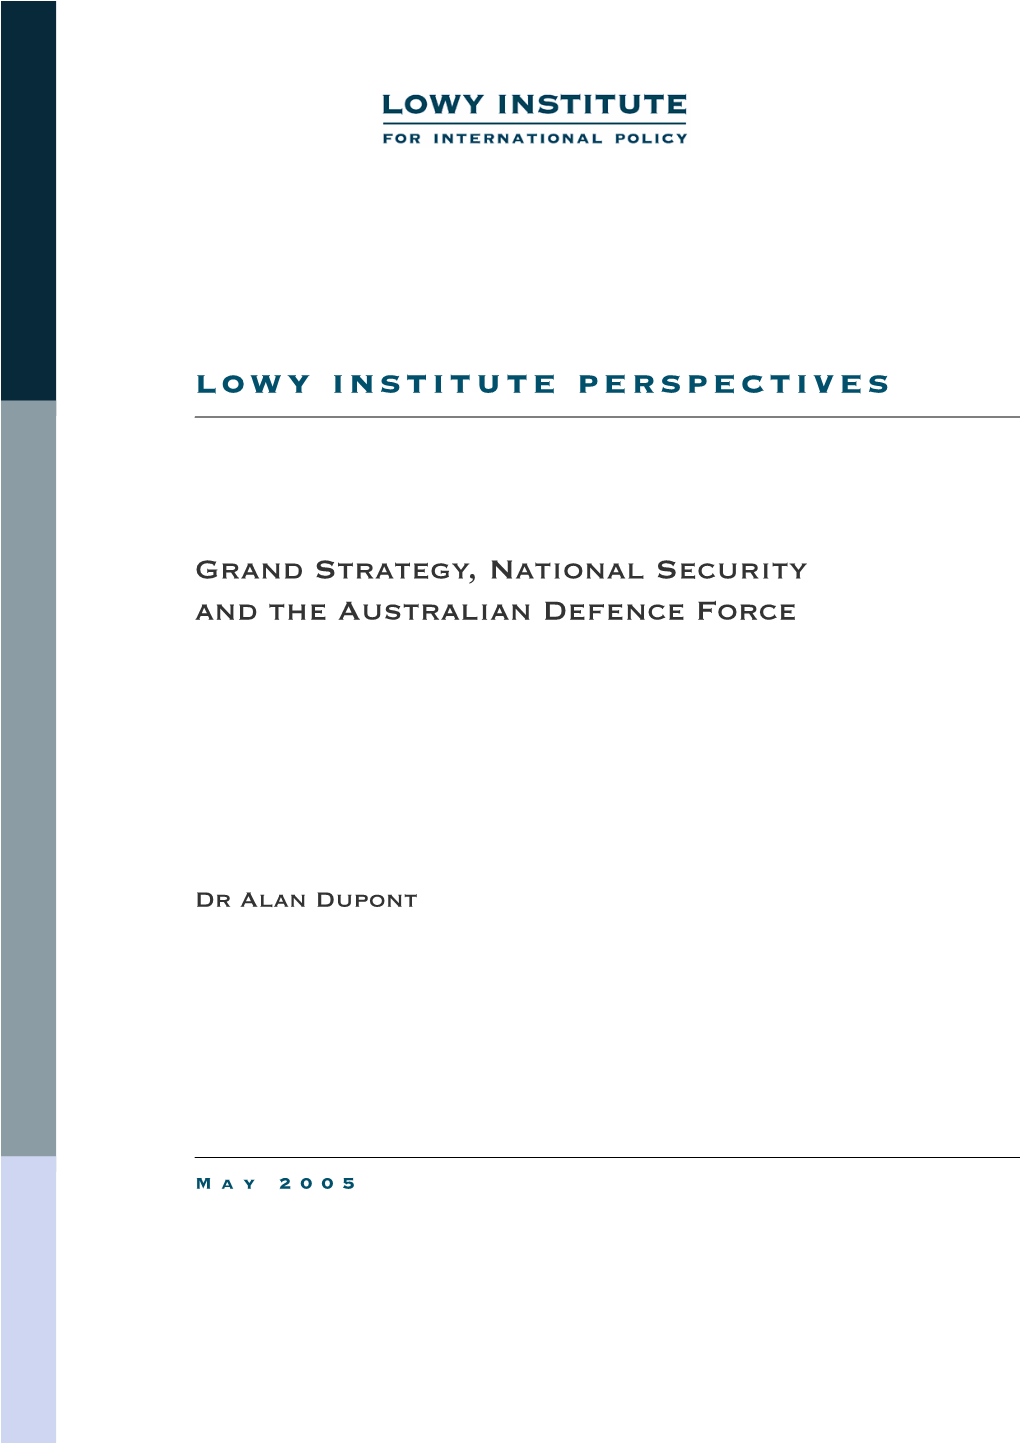 Grand Strategy, National Security and the Australia Defence Force